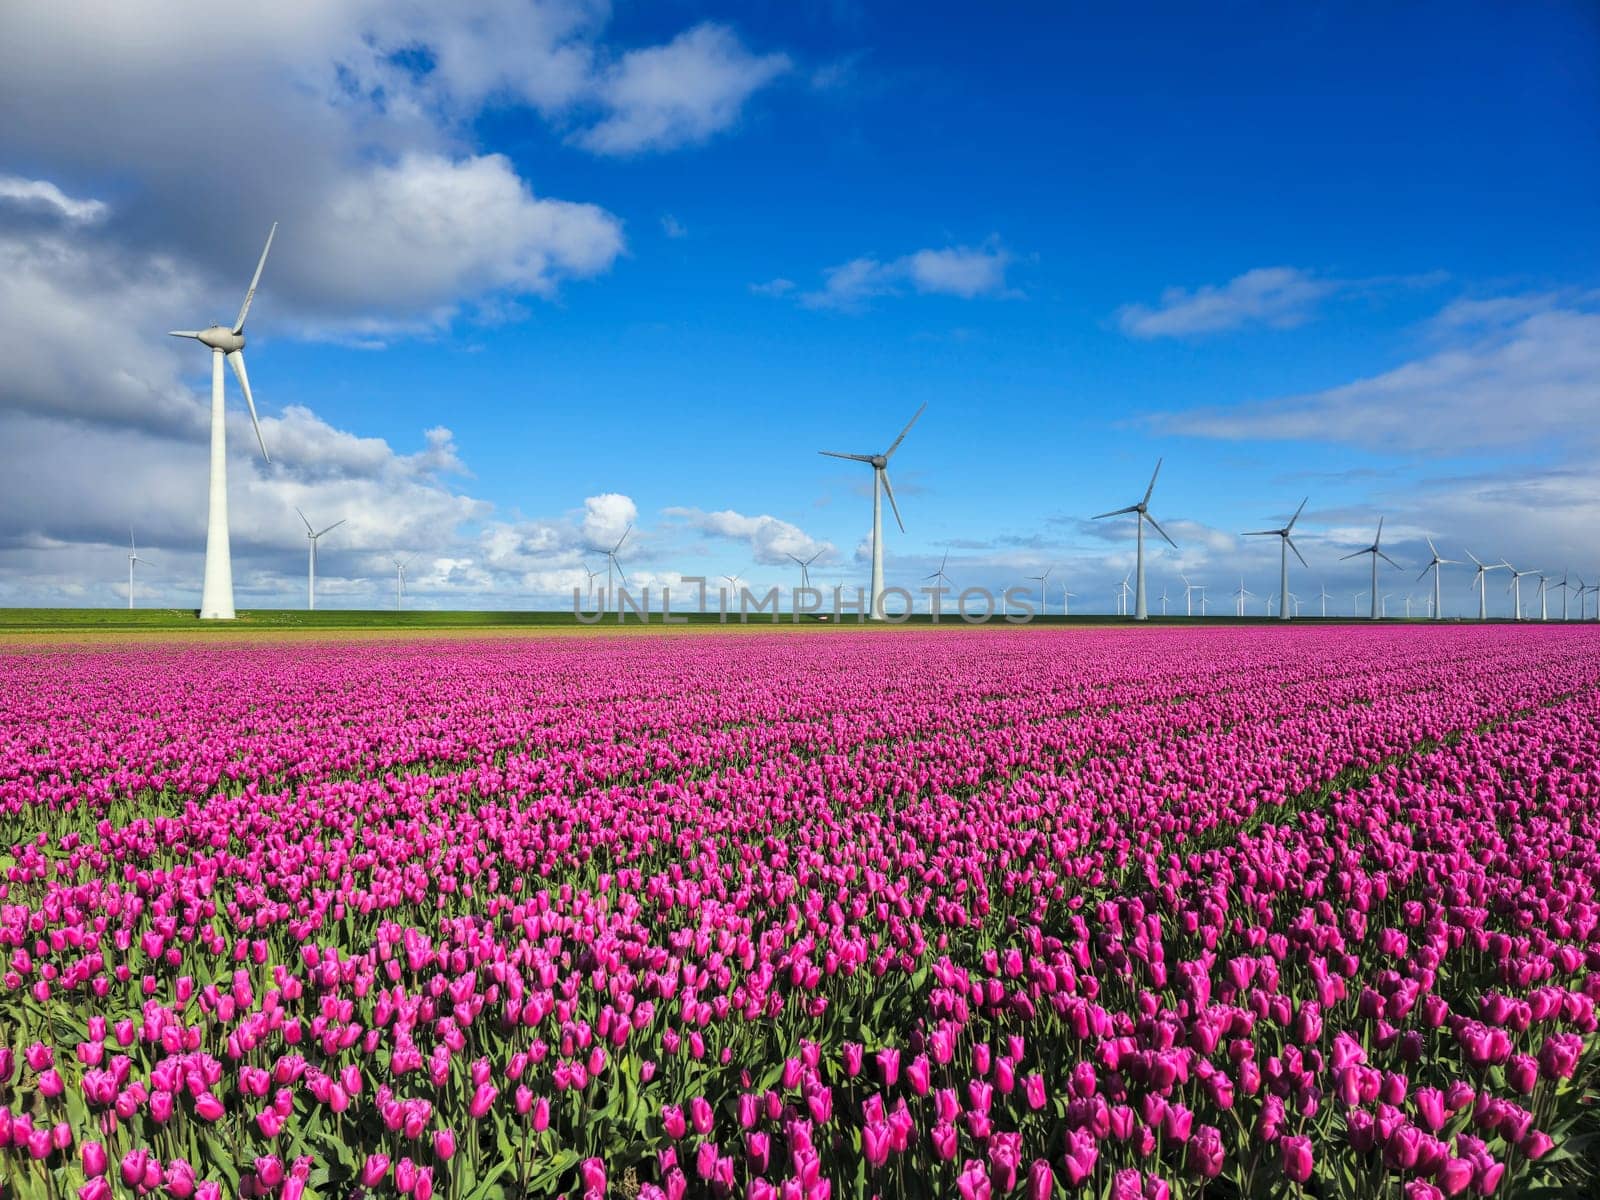 A mesmerizing sight of a vast field of purple tulips dancing in the wind, with majestic windmills standing tall in the background under the clear Spring sky by fokkebok